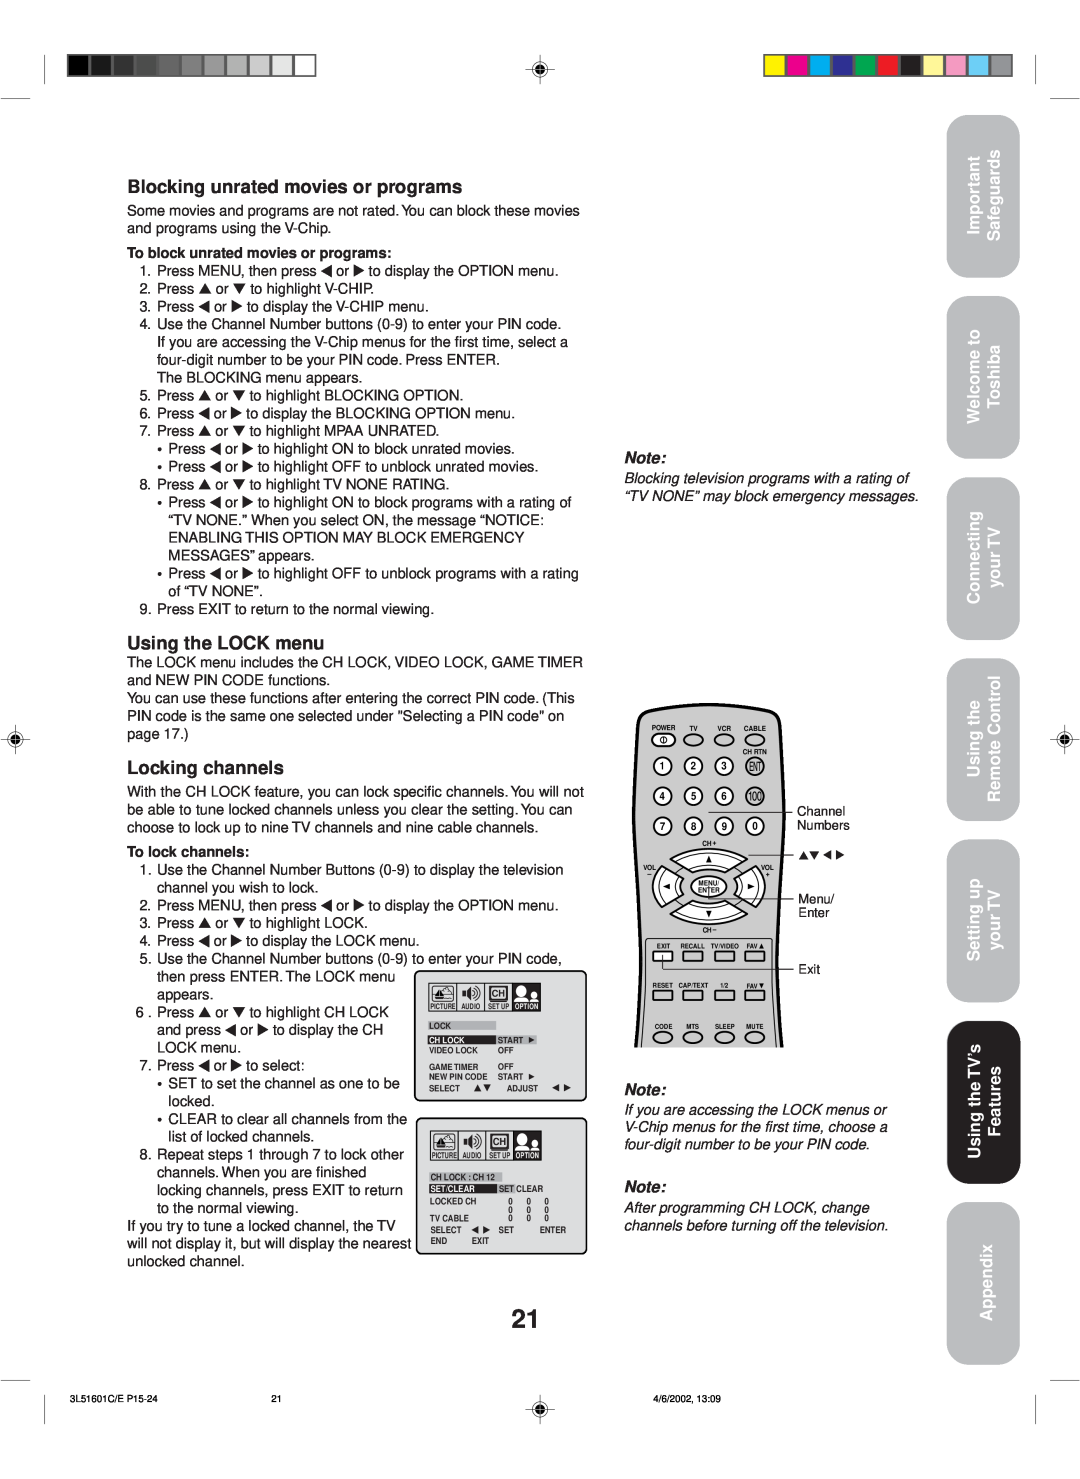 Toshiba TV 27A42 appendix Blocking unrated movies or programs, Using the LOCK menu, Locking channels, Safeguards, Appendix 